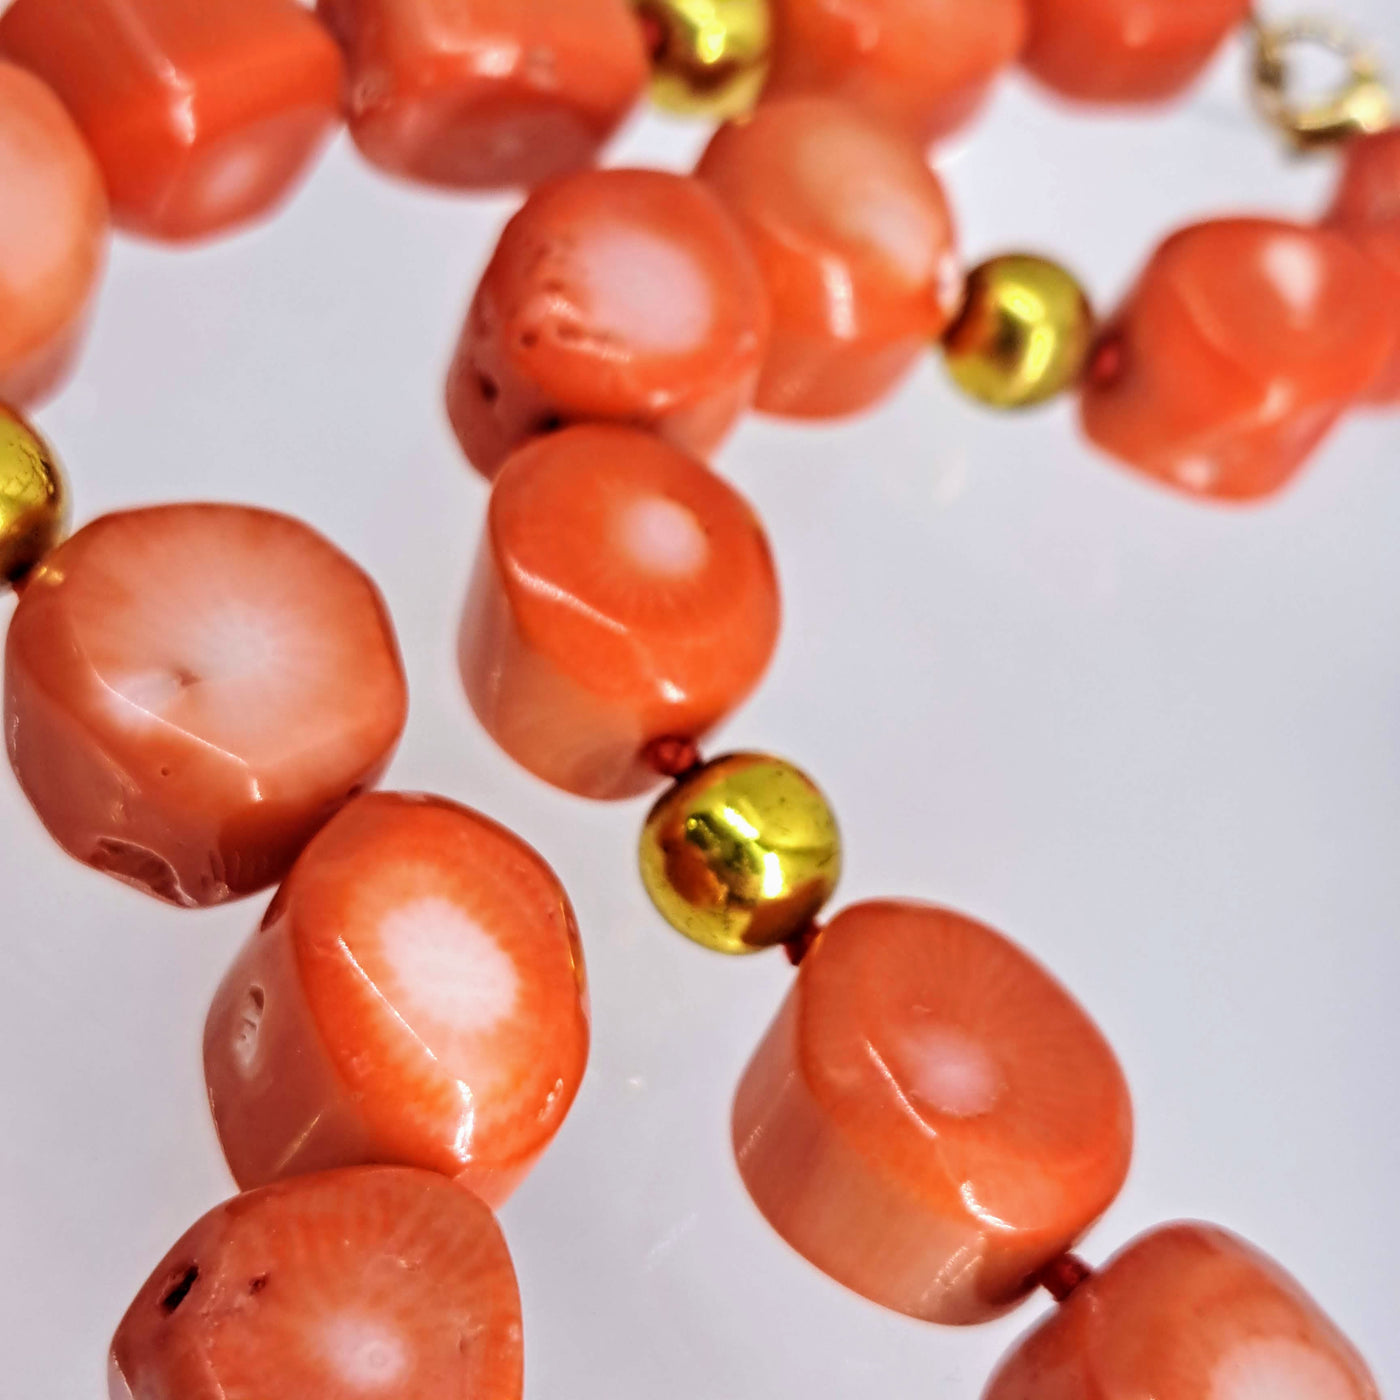 "Lady Danger" 20"-22" Necklace - Red Coral, Gold Sterling, Brass Balls